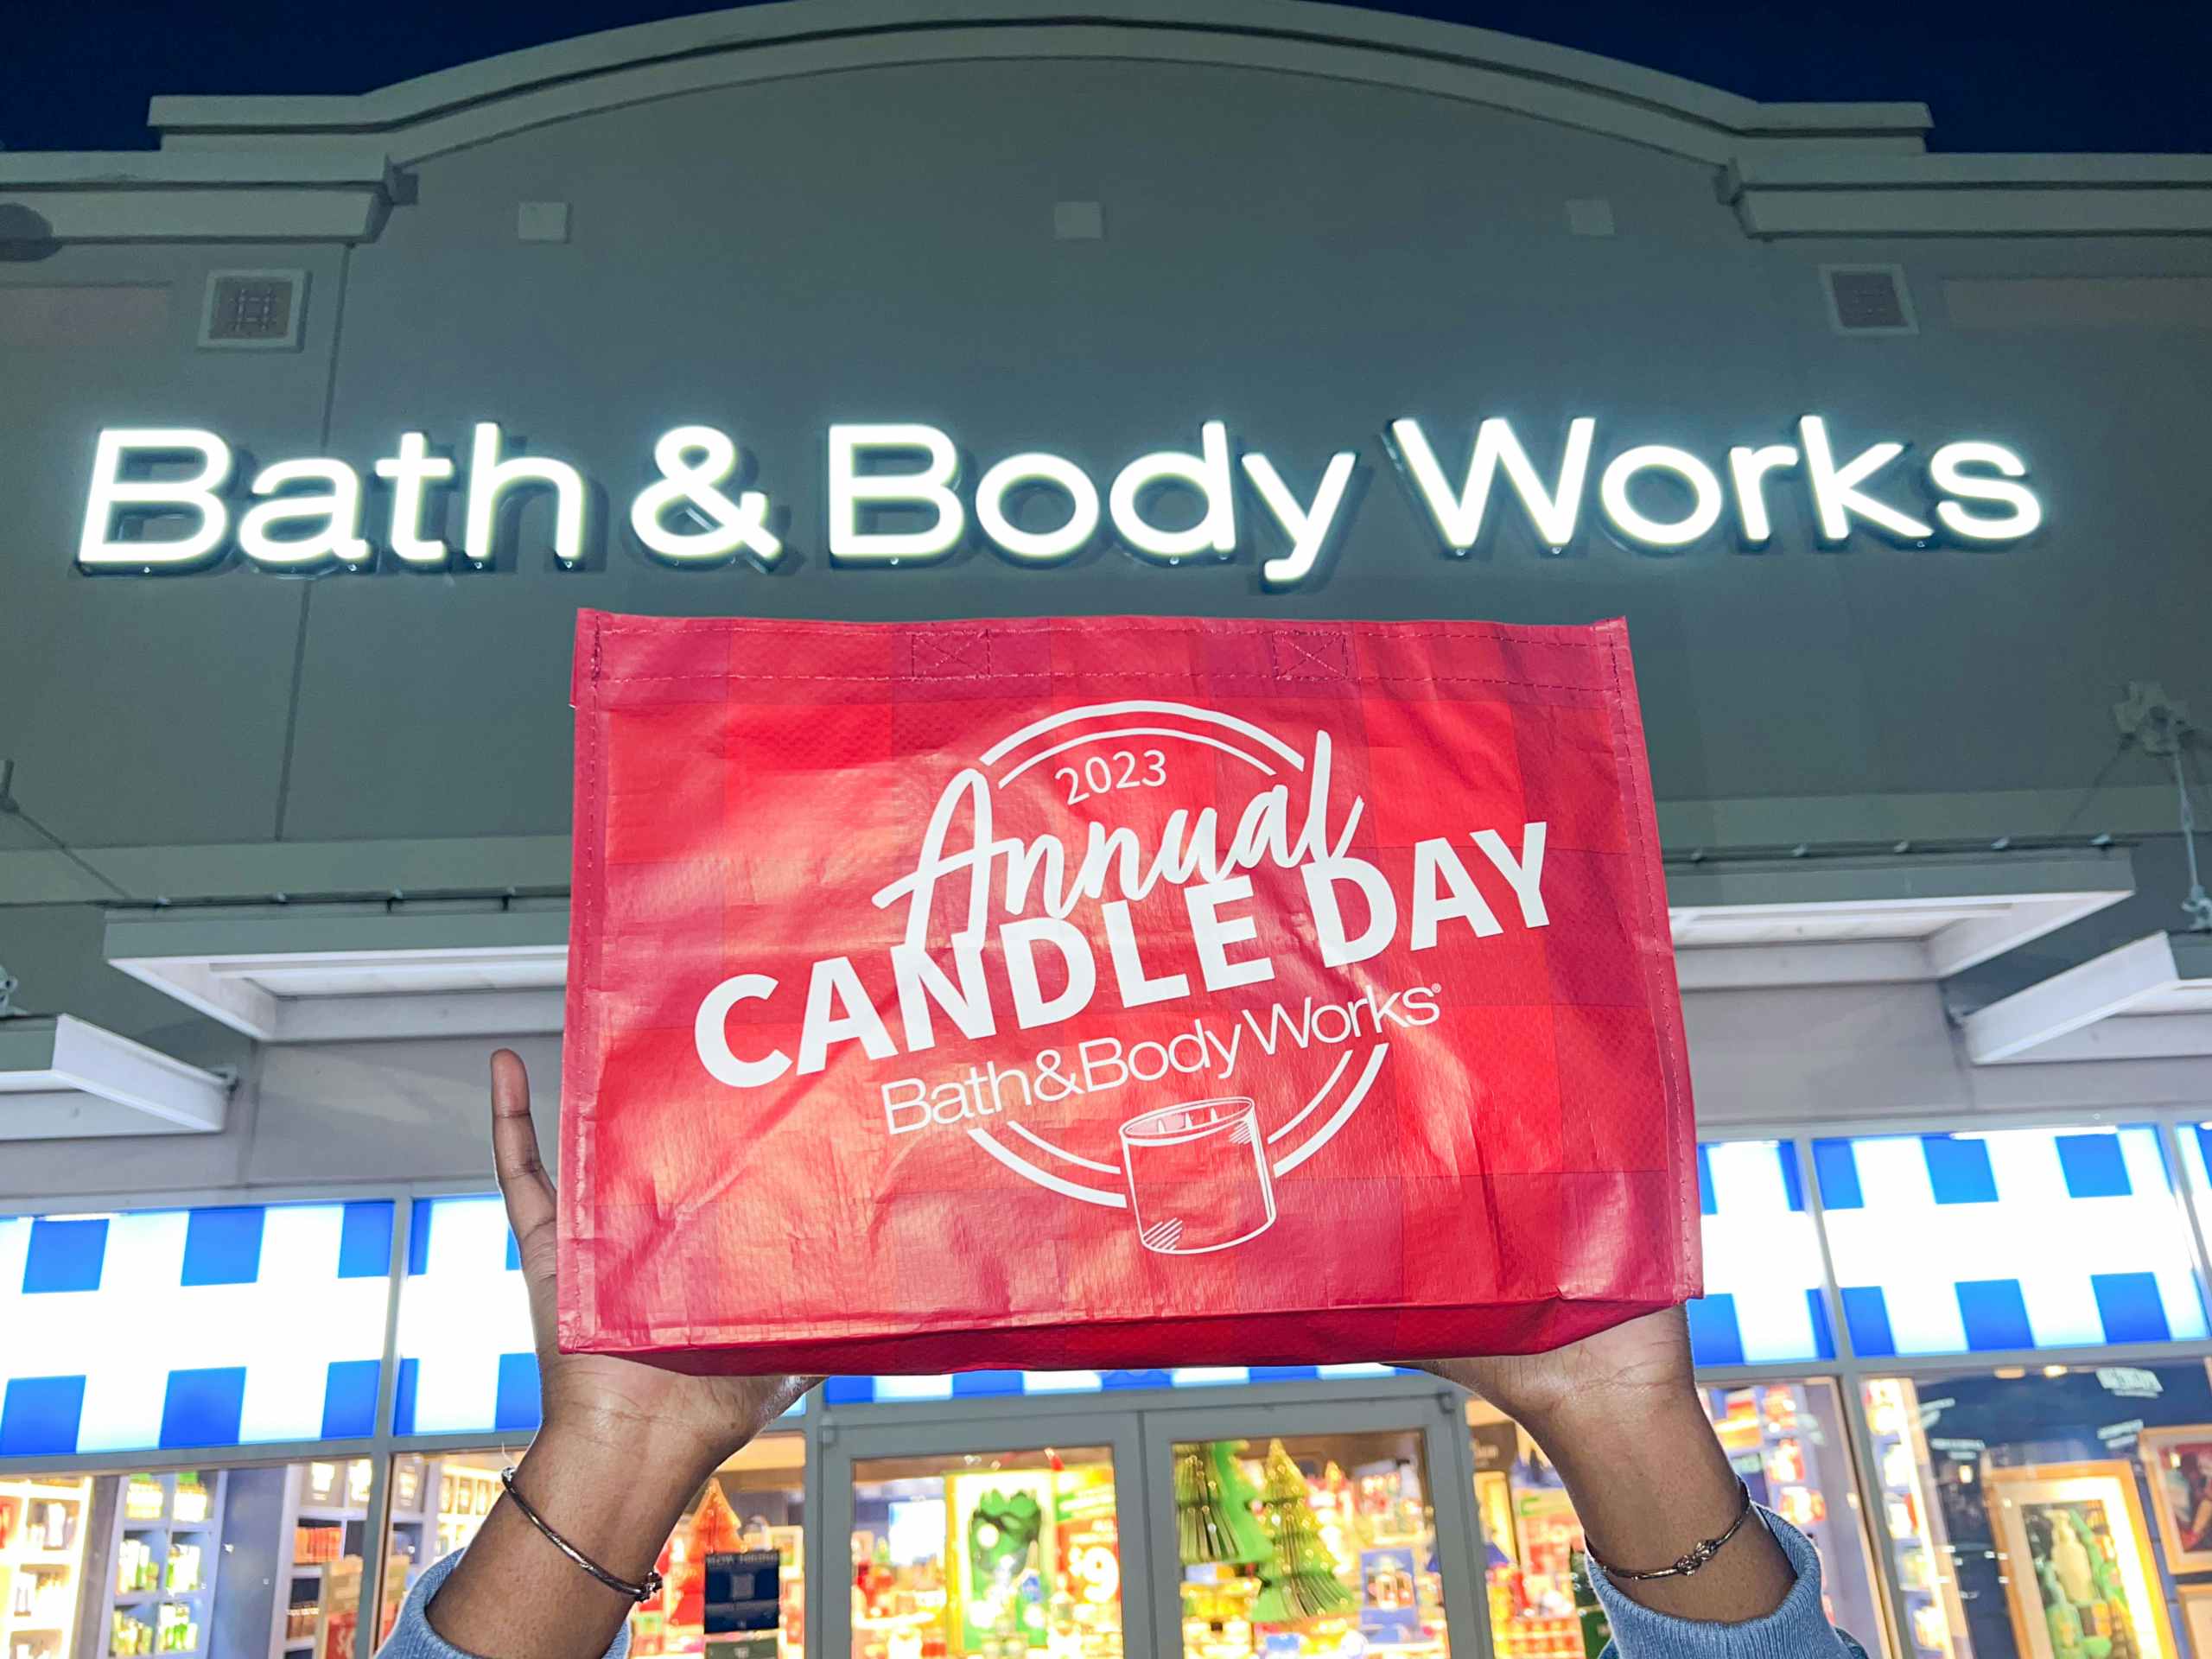 bath-body-works-candle-day-sale-2023-kcl-model-01